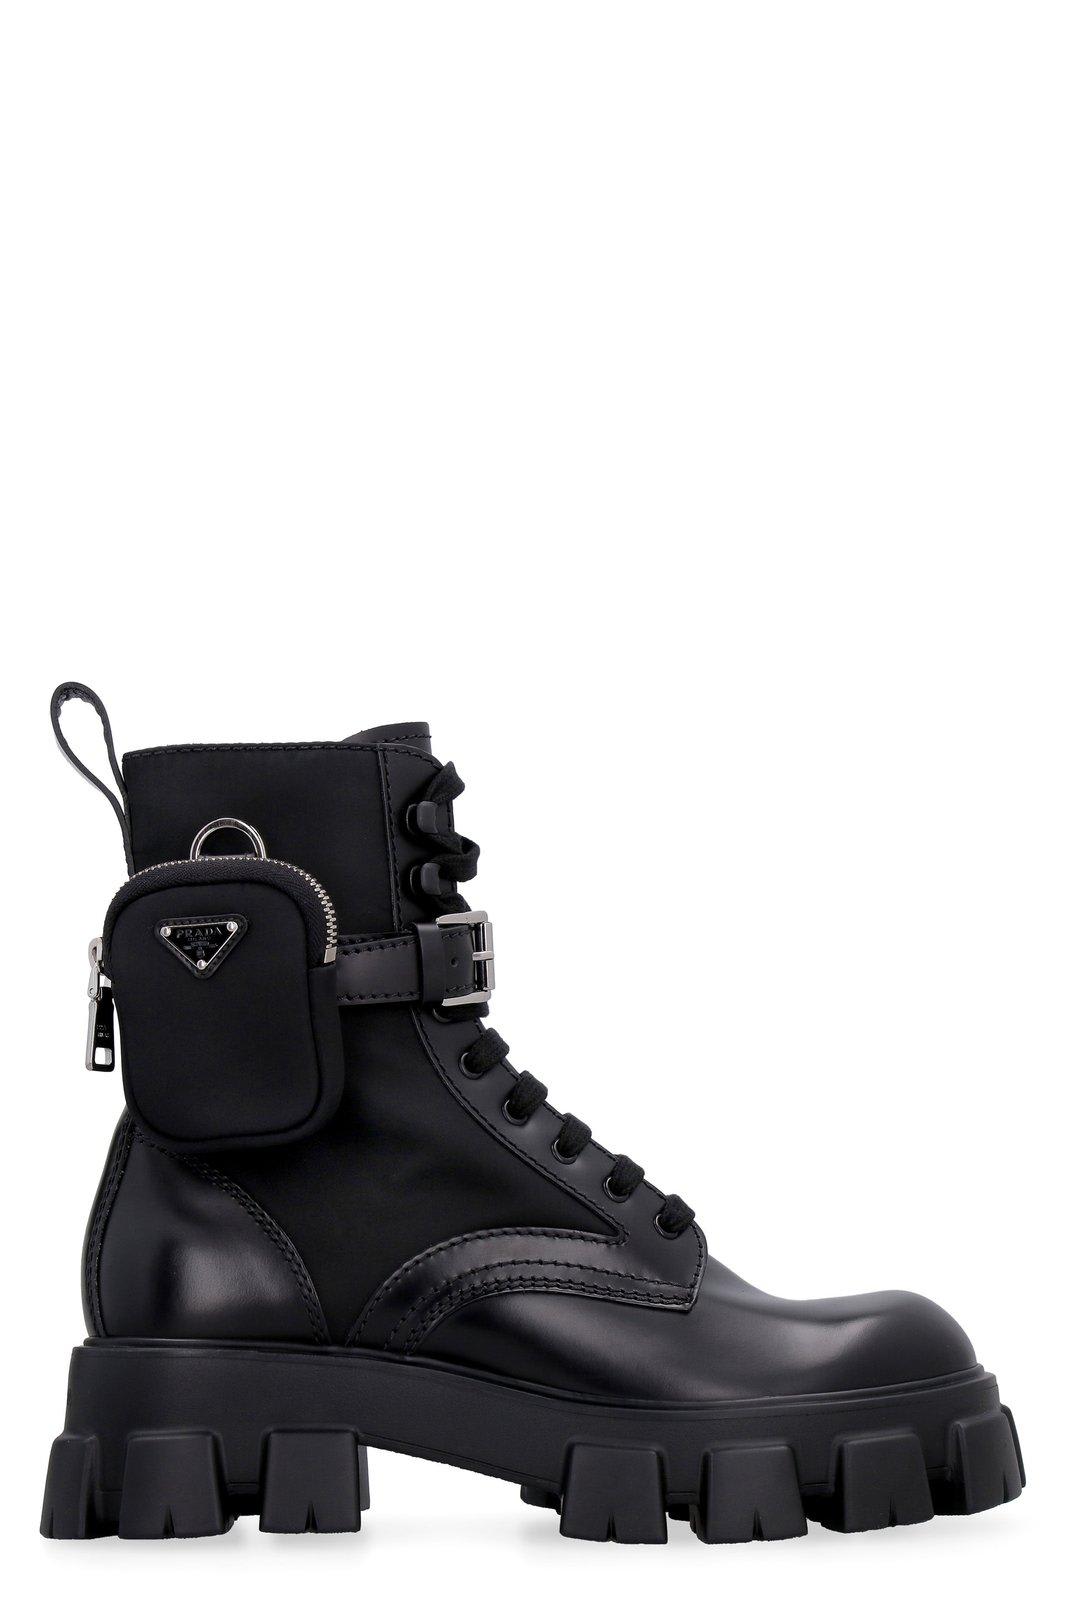 PRADA PANELLED POUCH-ATTACHED COMBAT BOOTS